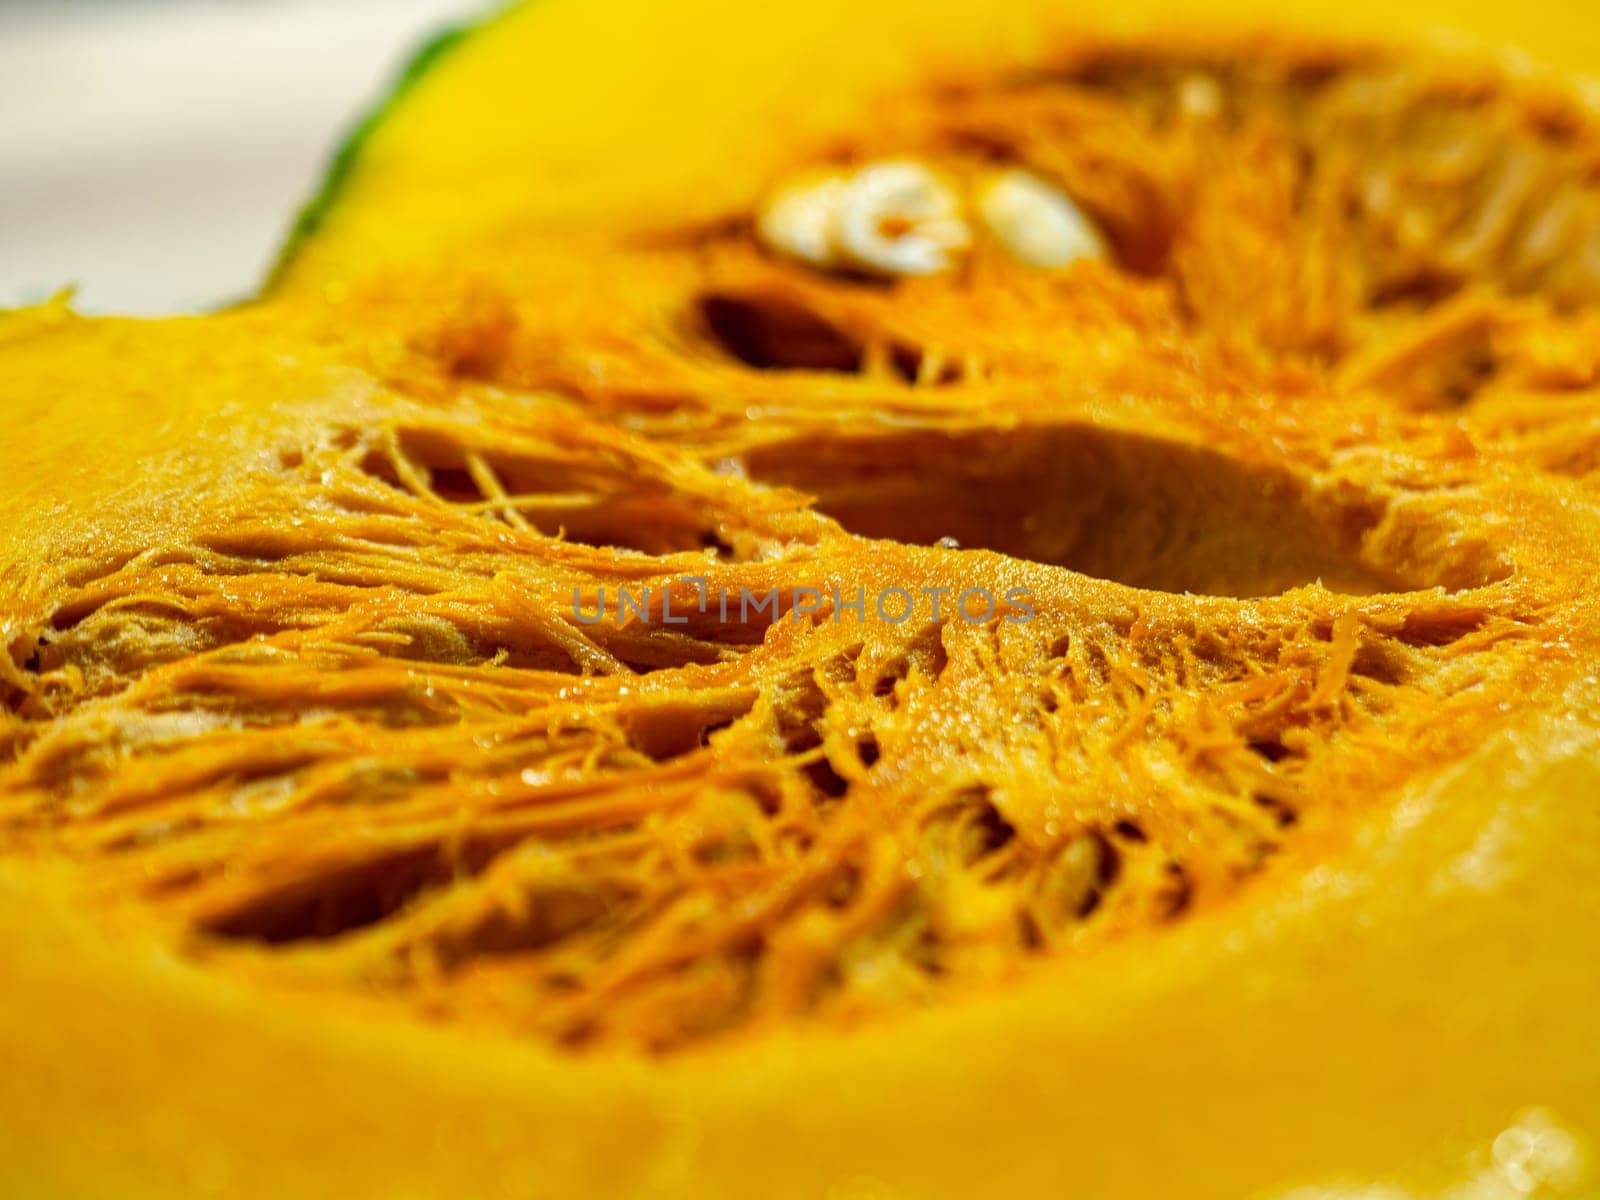 Vivid close-up of thick fresh pumpkin slice on wood table. Smooth orange skin with drops of water glistening on surface. Soft natural light illuminates texture and color of ripe flesh in great detail. Shallow depth of field keeps ridges, seeds, and skin in sharp focus.